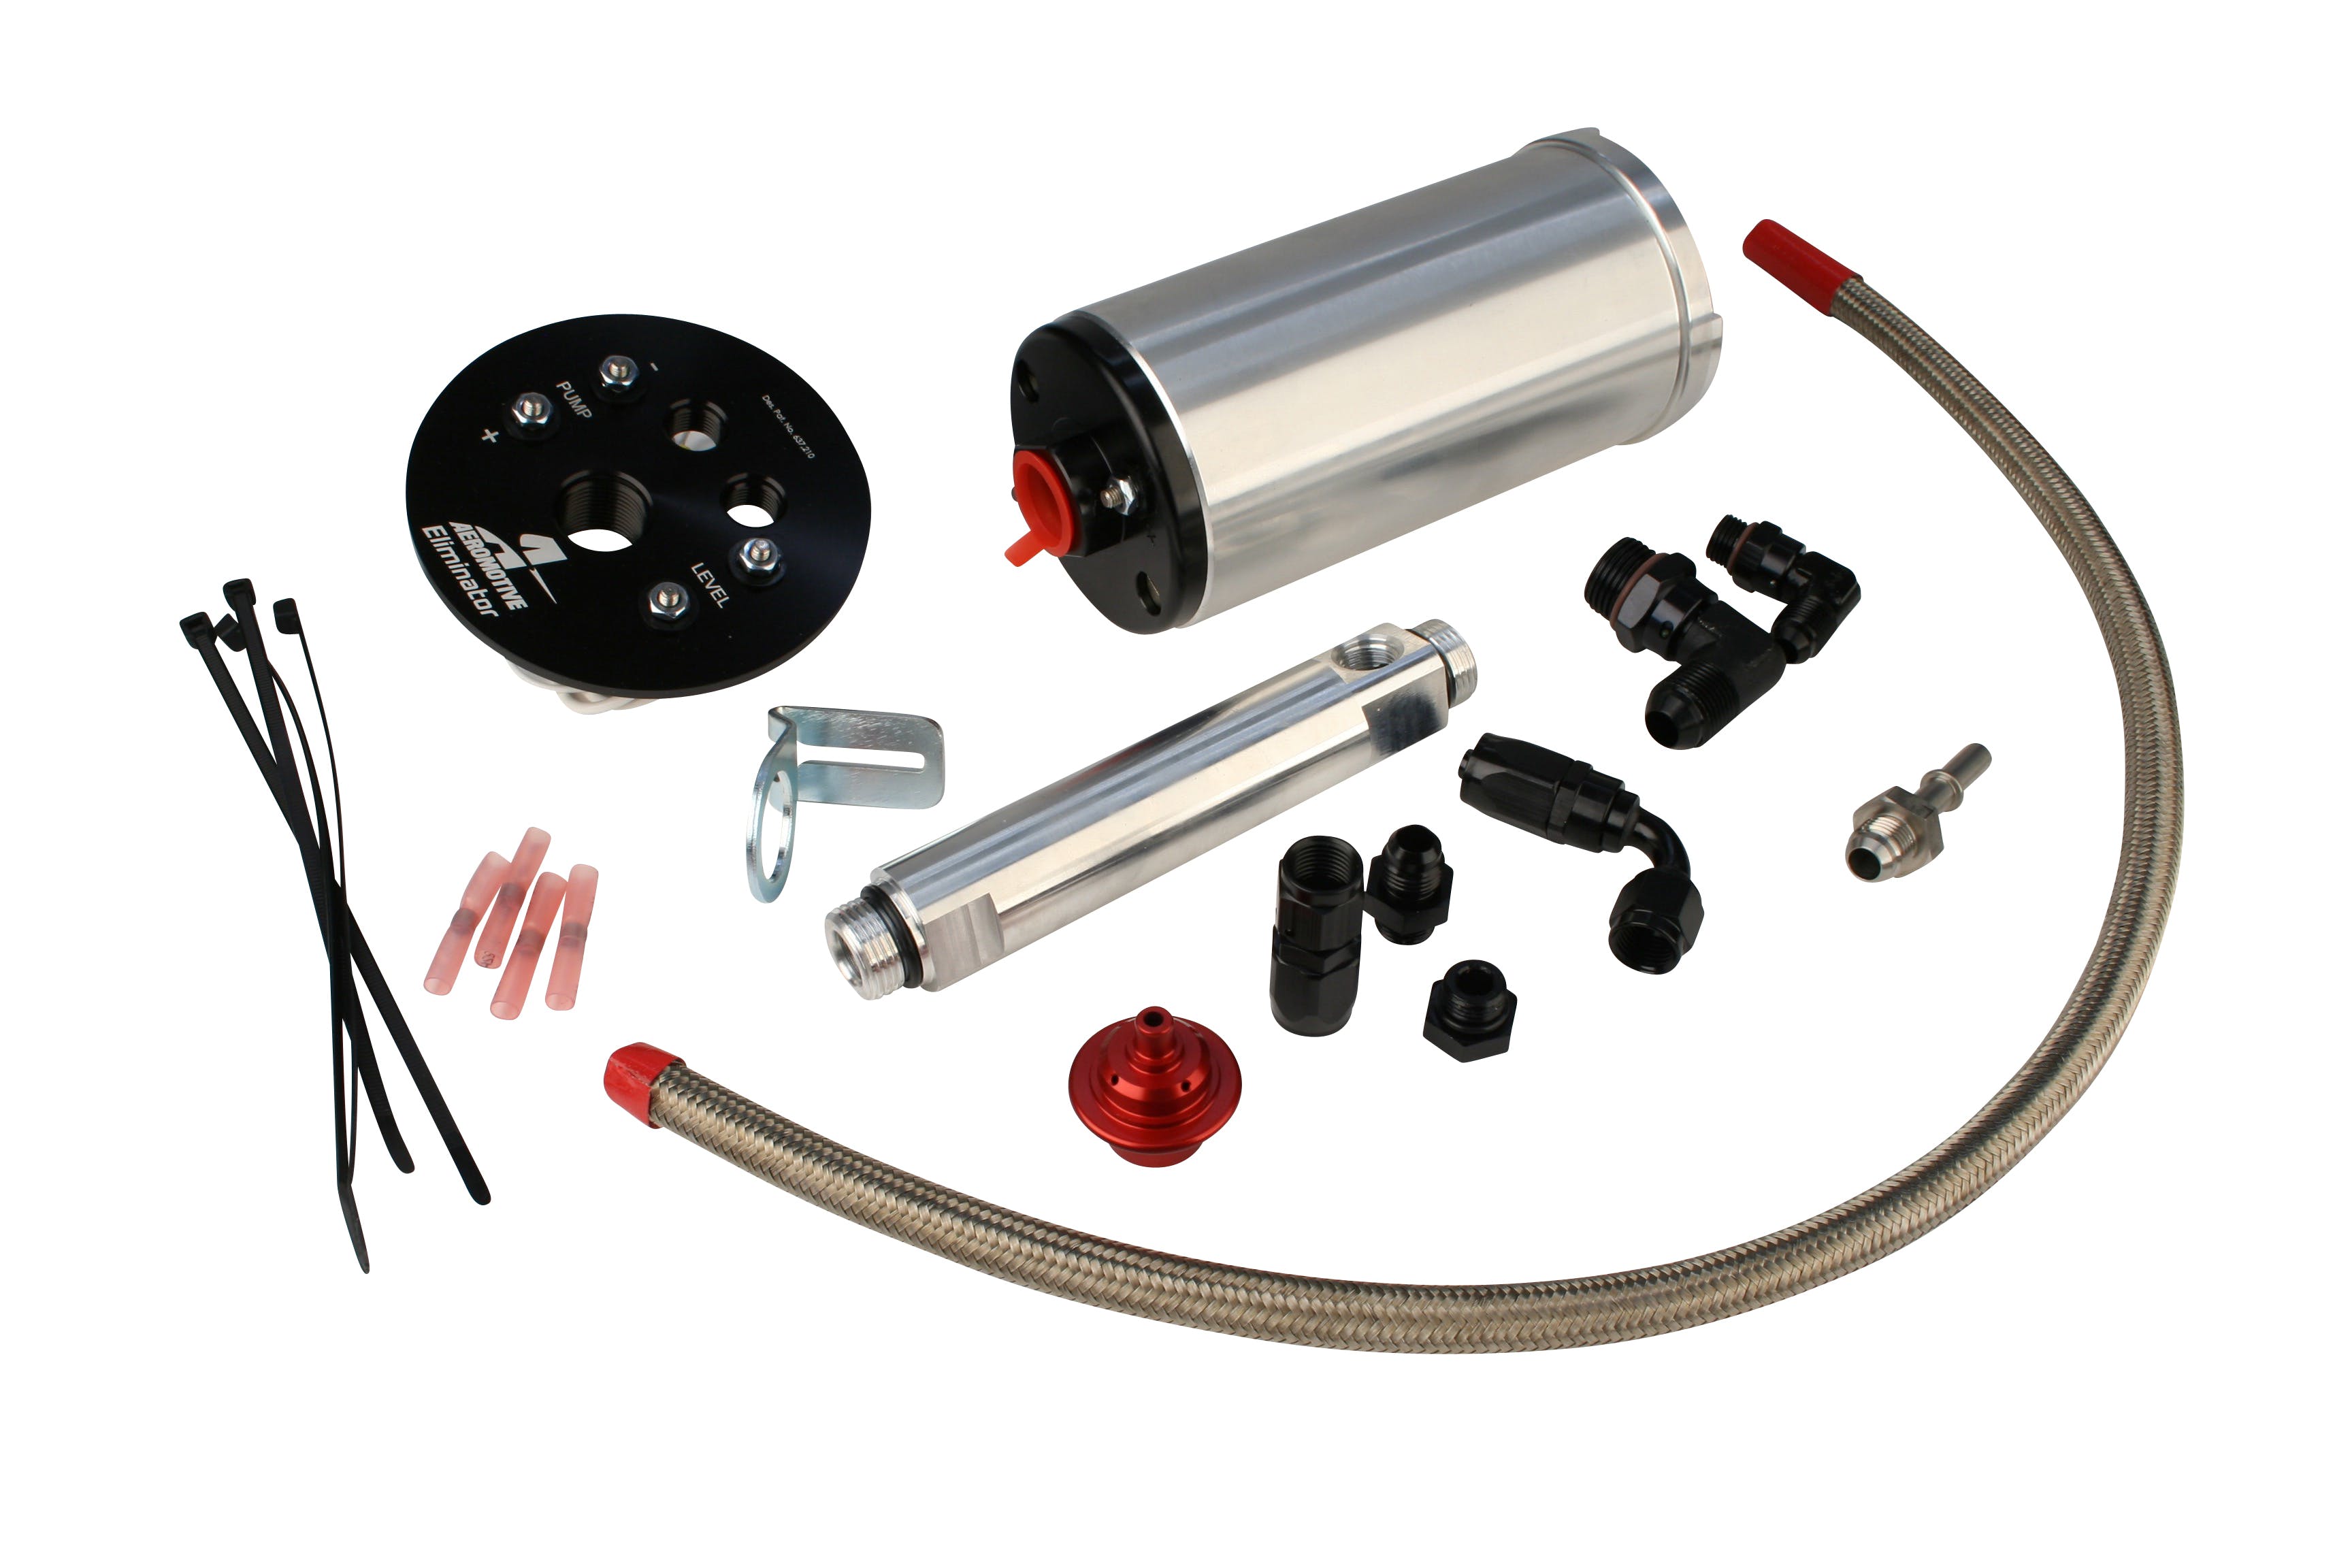 Aeromotive Fuel System 18671 Stealth Fuel System, In-Tank - 2003 and up Corvette, Eliminator